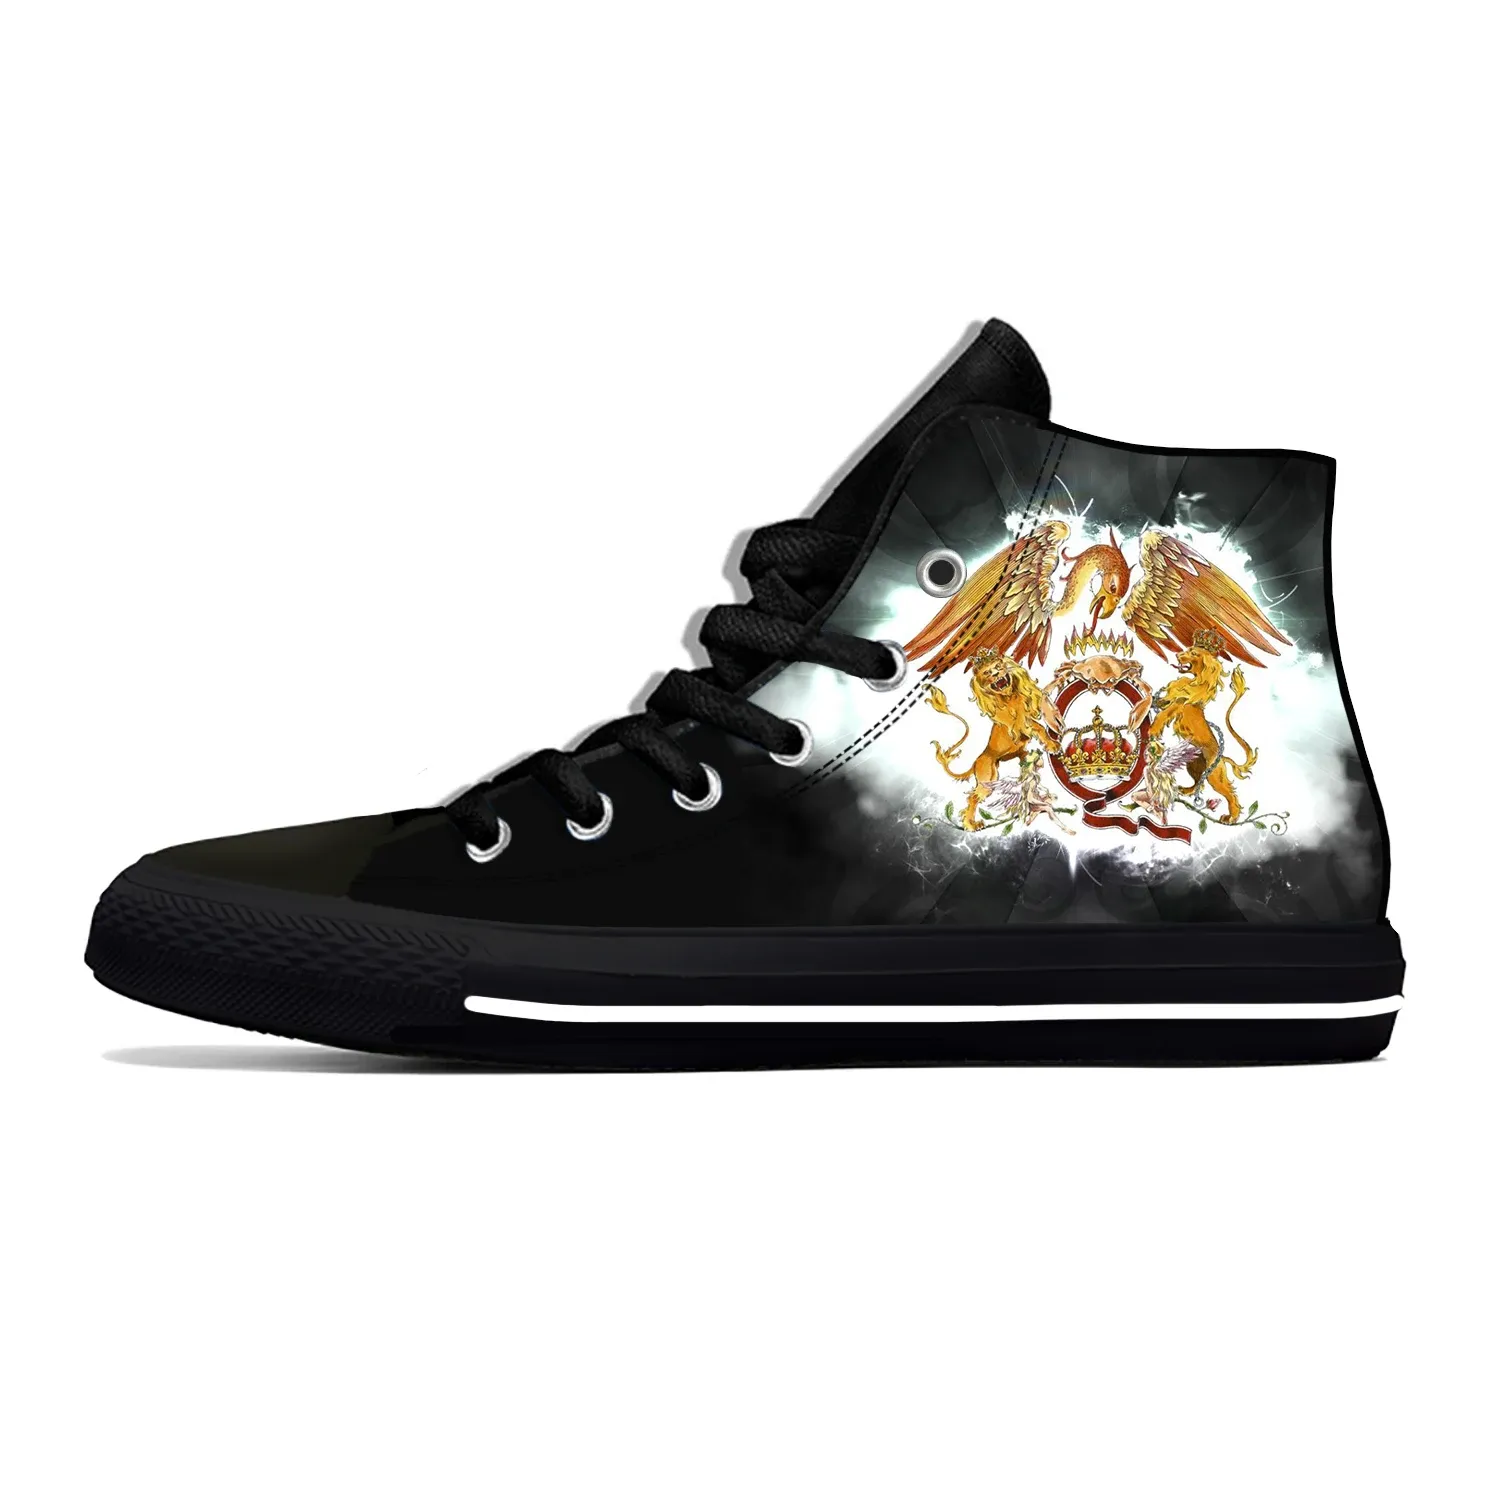 Chaussures Hot Queen Rock Band Freddie Mercury Music Fashion Casual Cascs Chaussures High Top Lightweight Breathable 3D Print Men Women Sneakers